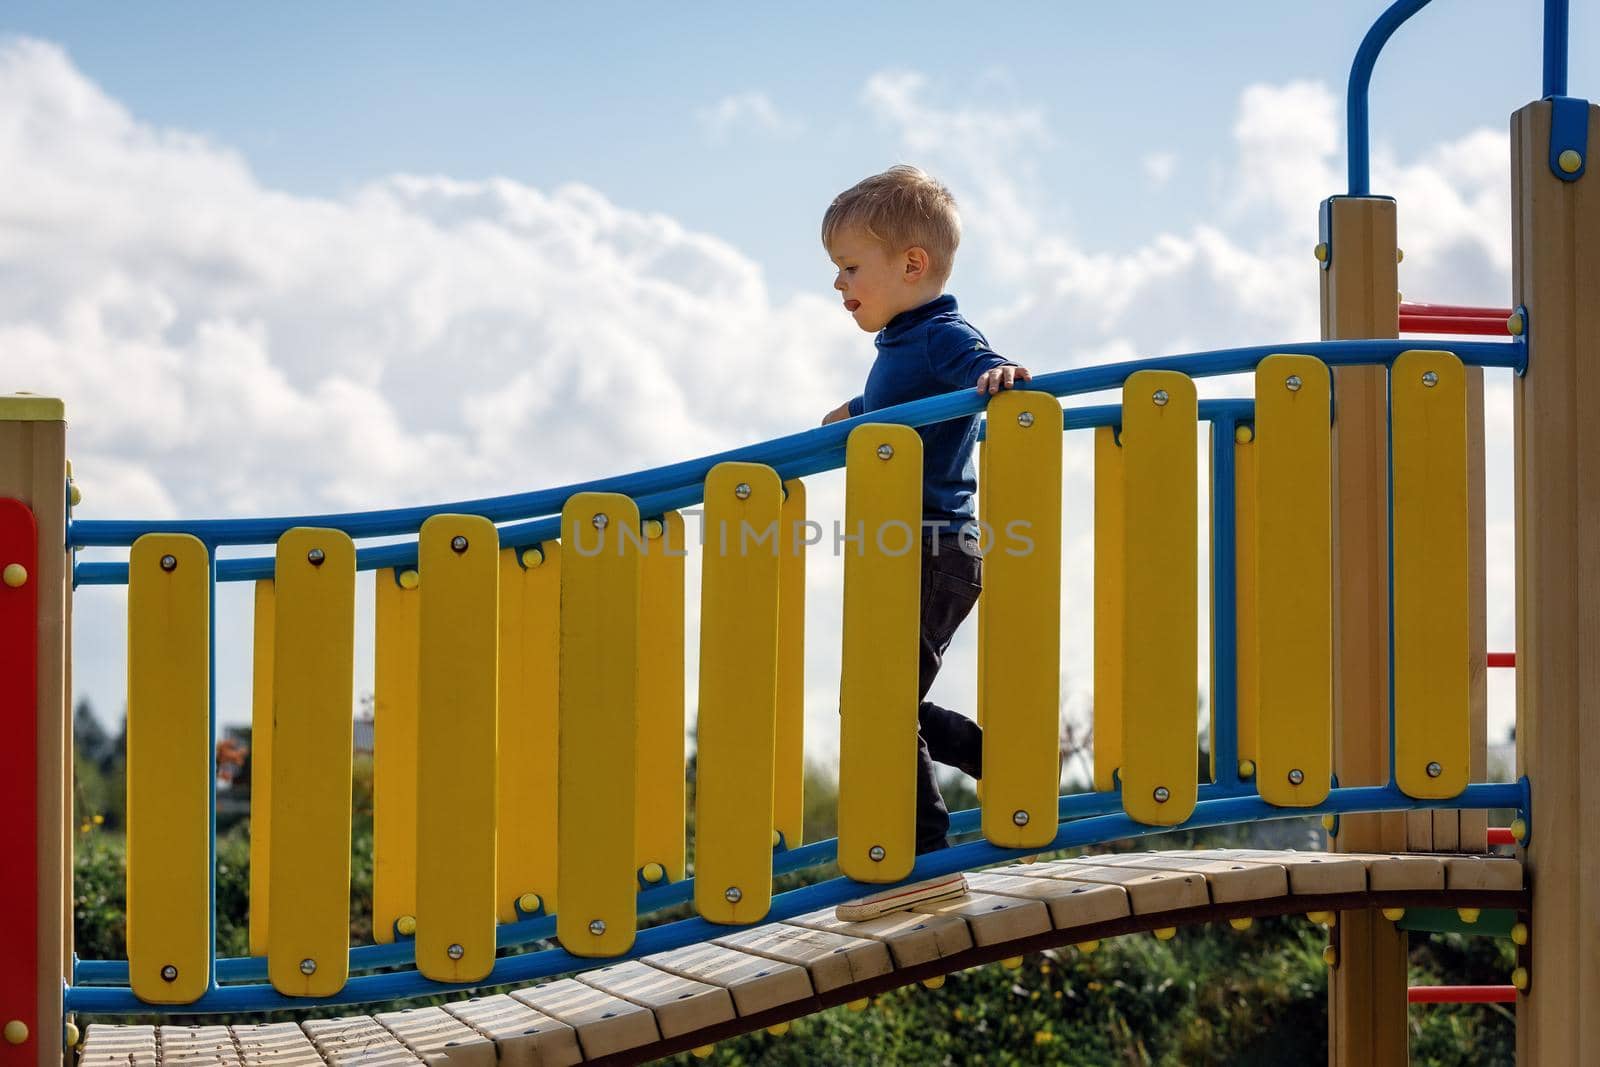 The little boy concentrates walking along the curved bridge of the playground. Curved yellow fence, light blue sky with white clouds in the background by Lincikas